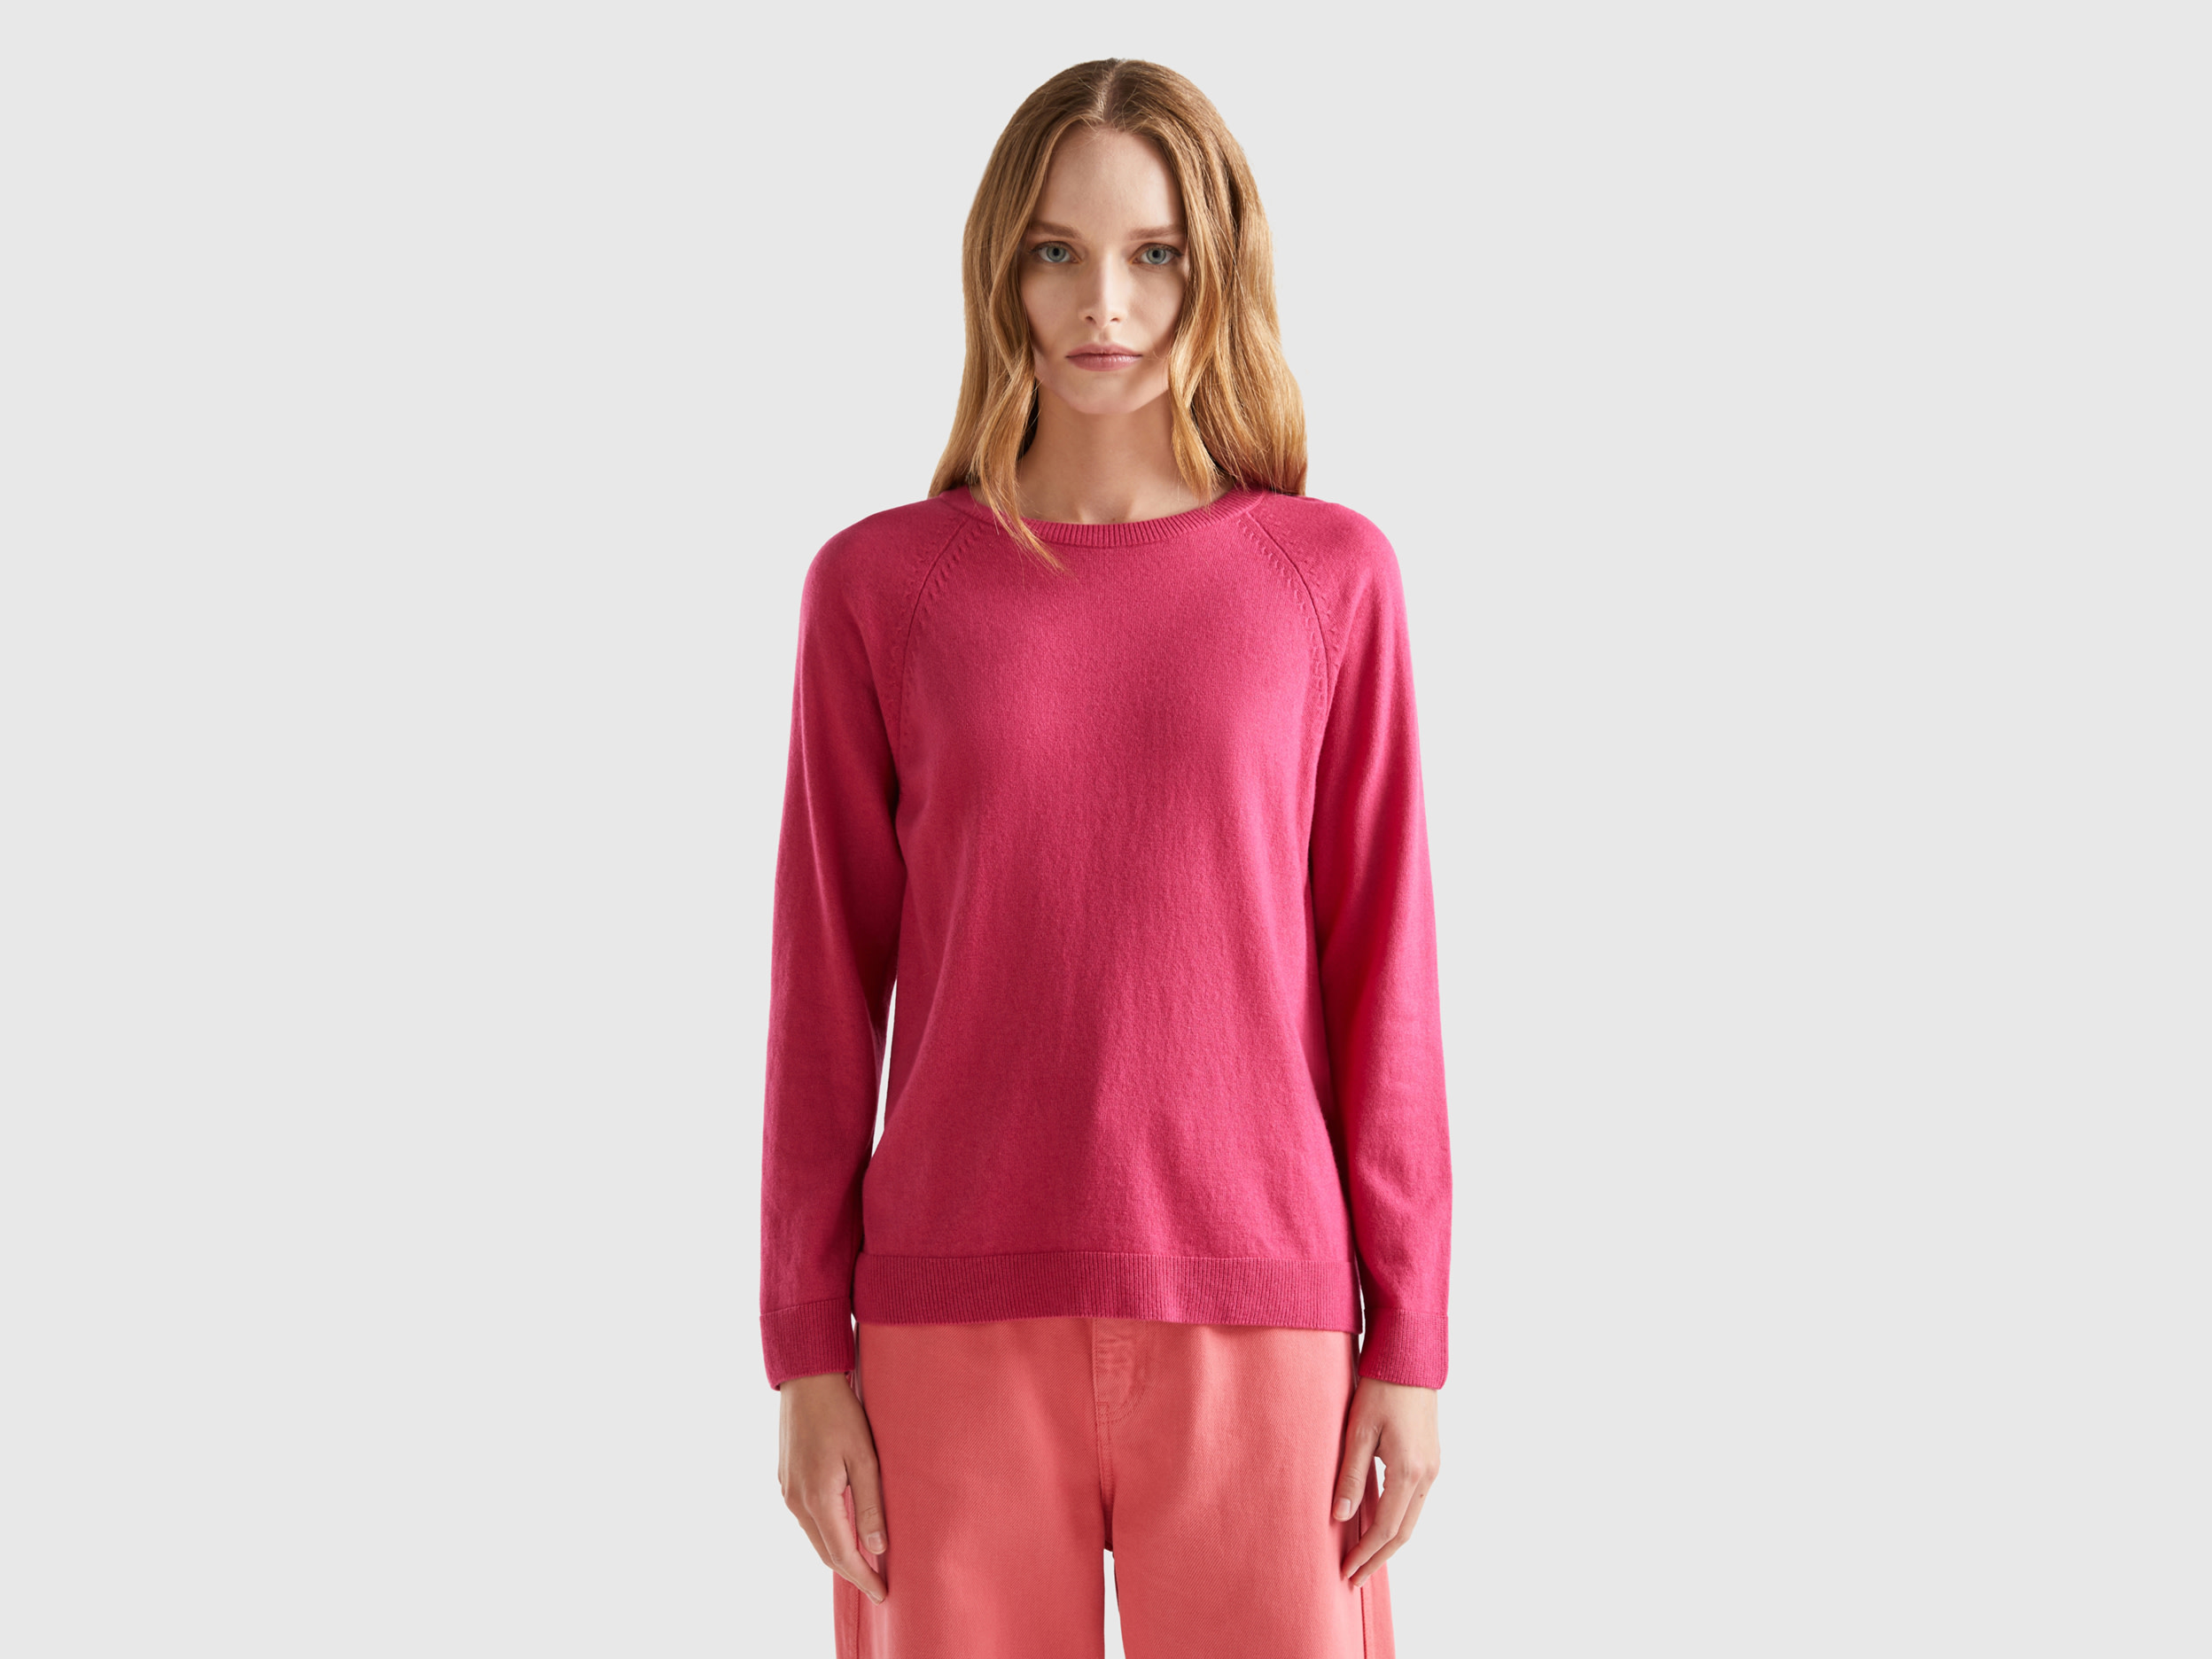 Benetton, Magenta Red Crew Neck Sweater In Cashmere And Wool Blend, size S, Cyclamen, Women